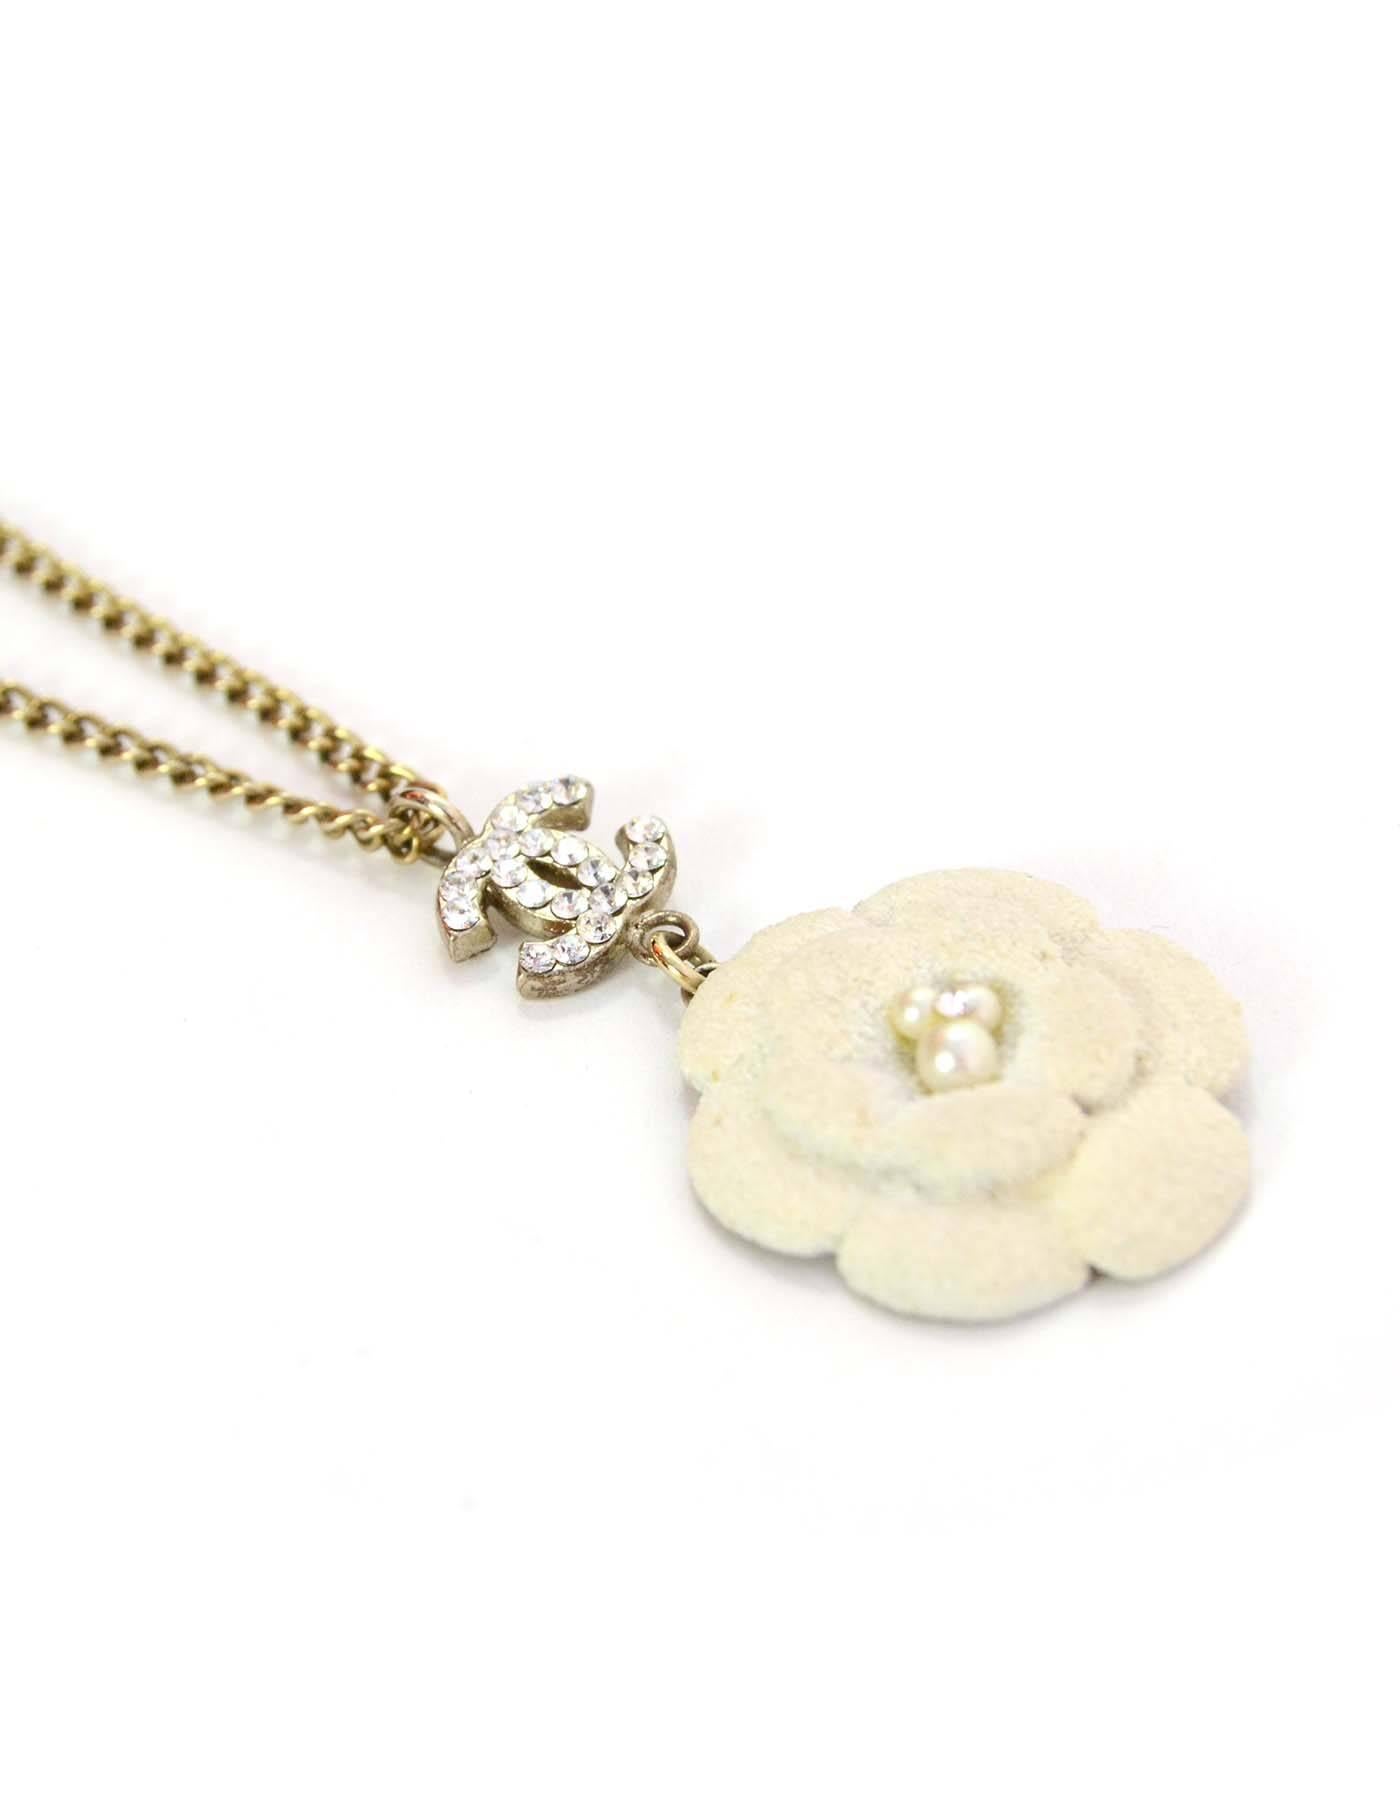 Chanel White Textured Camelia Pendant Necklace
Features crystal CC above flower and three faux pearls and one crystal in flower center
Made In: France
Year of Production: 2005
Color: Silvertone and white
Materials: Metal, textured metal,